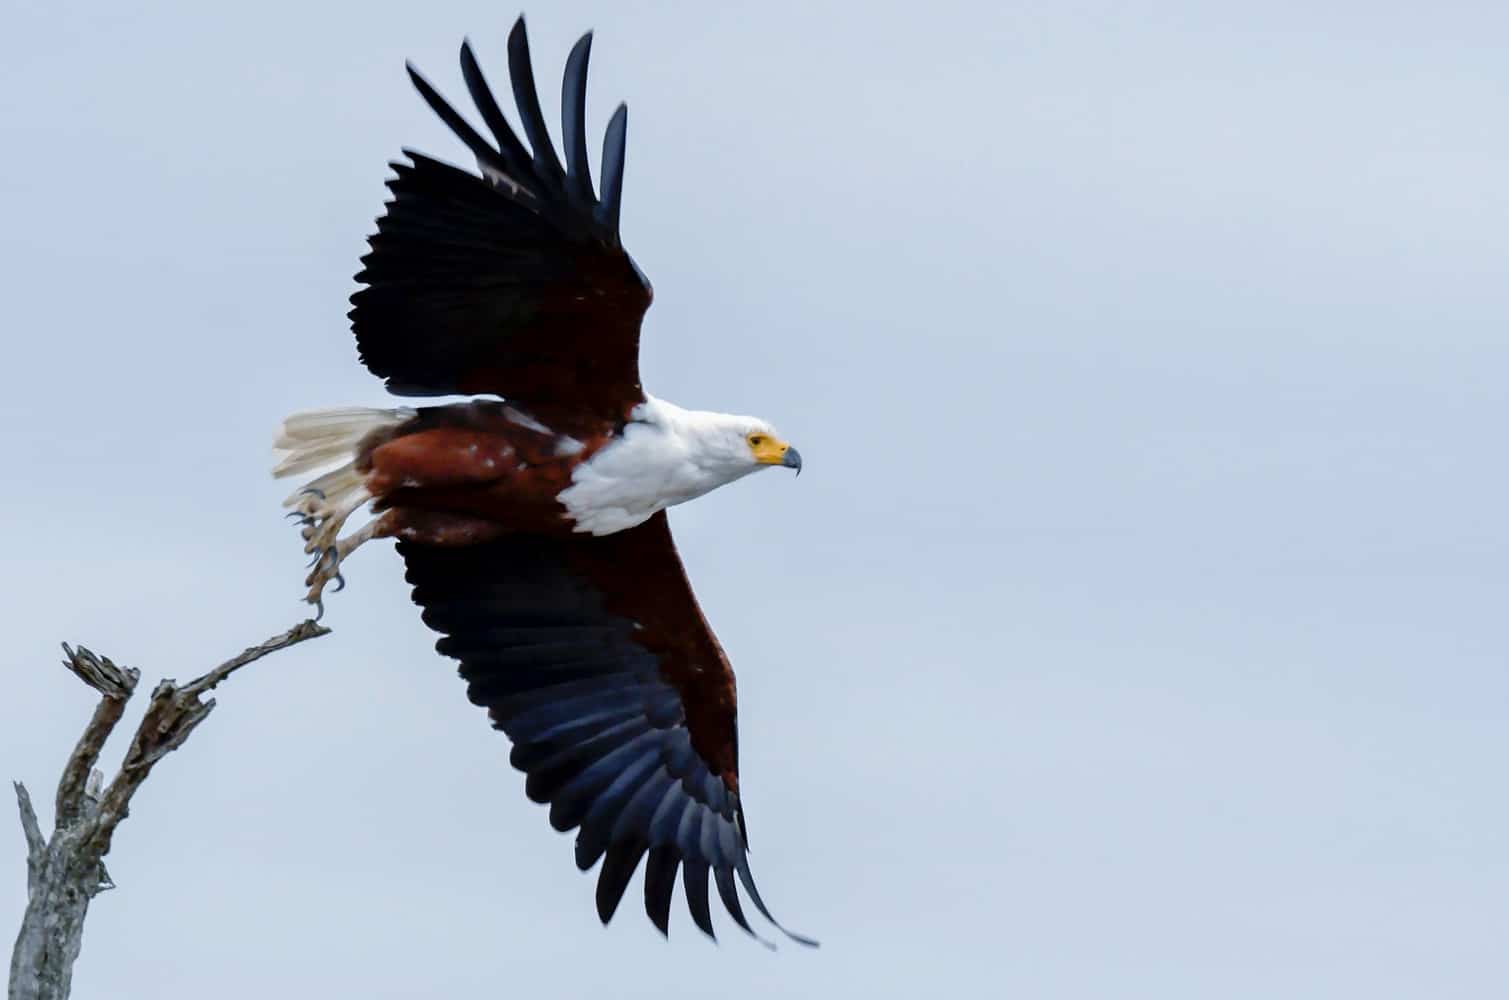 a picture of an eagle lifting off